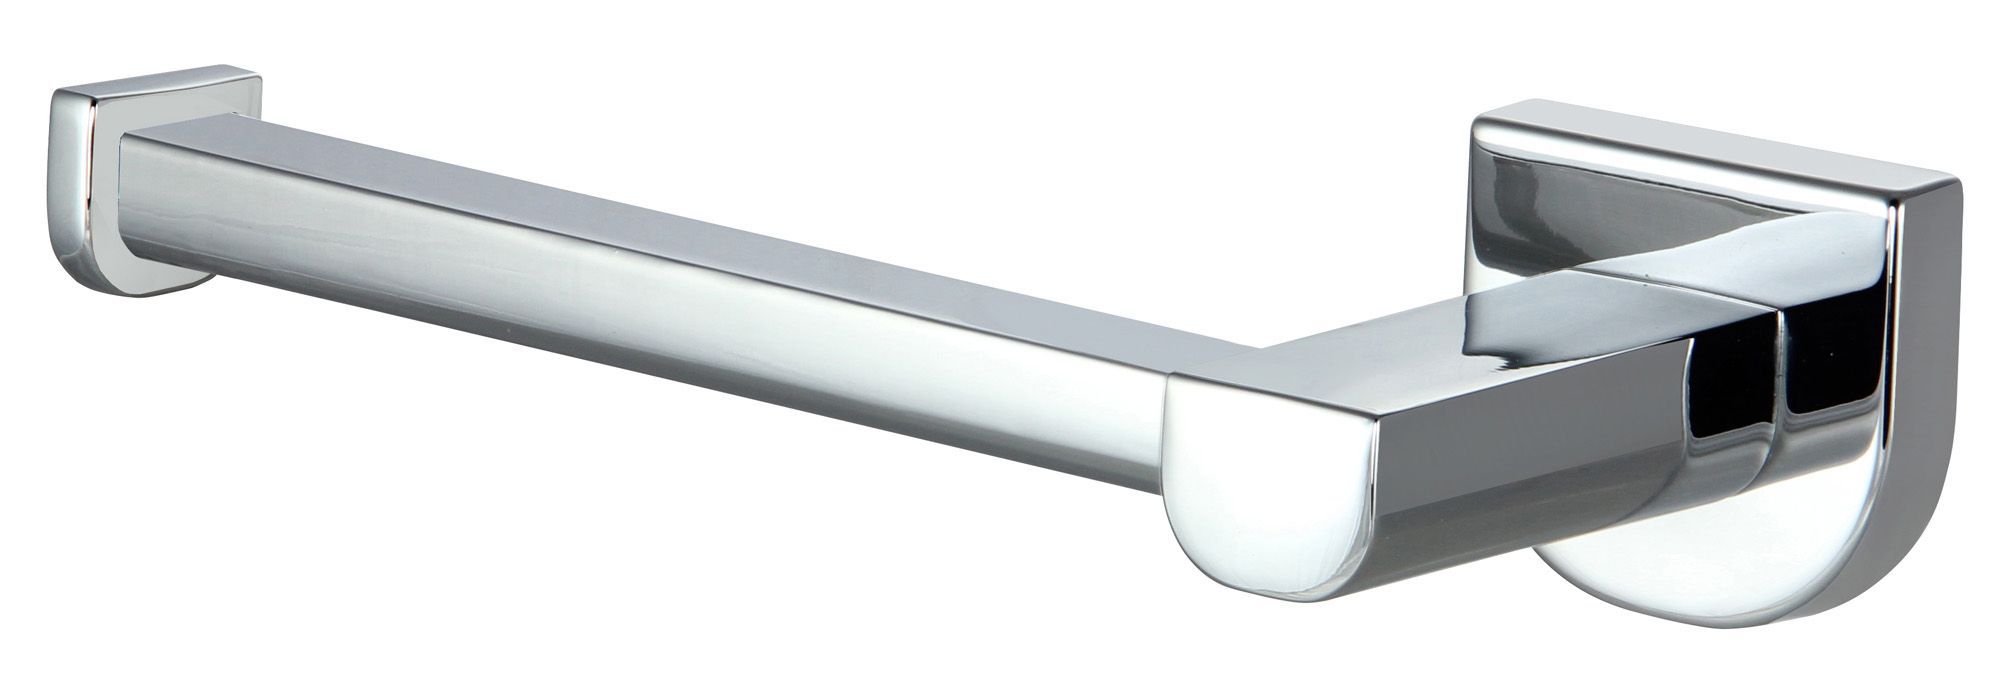 SKIP20A AXIS TOILET ROLL HOLDER